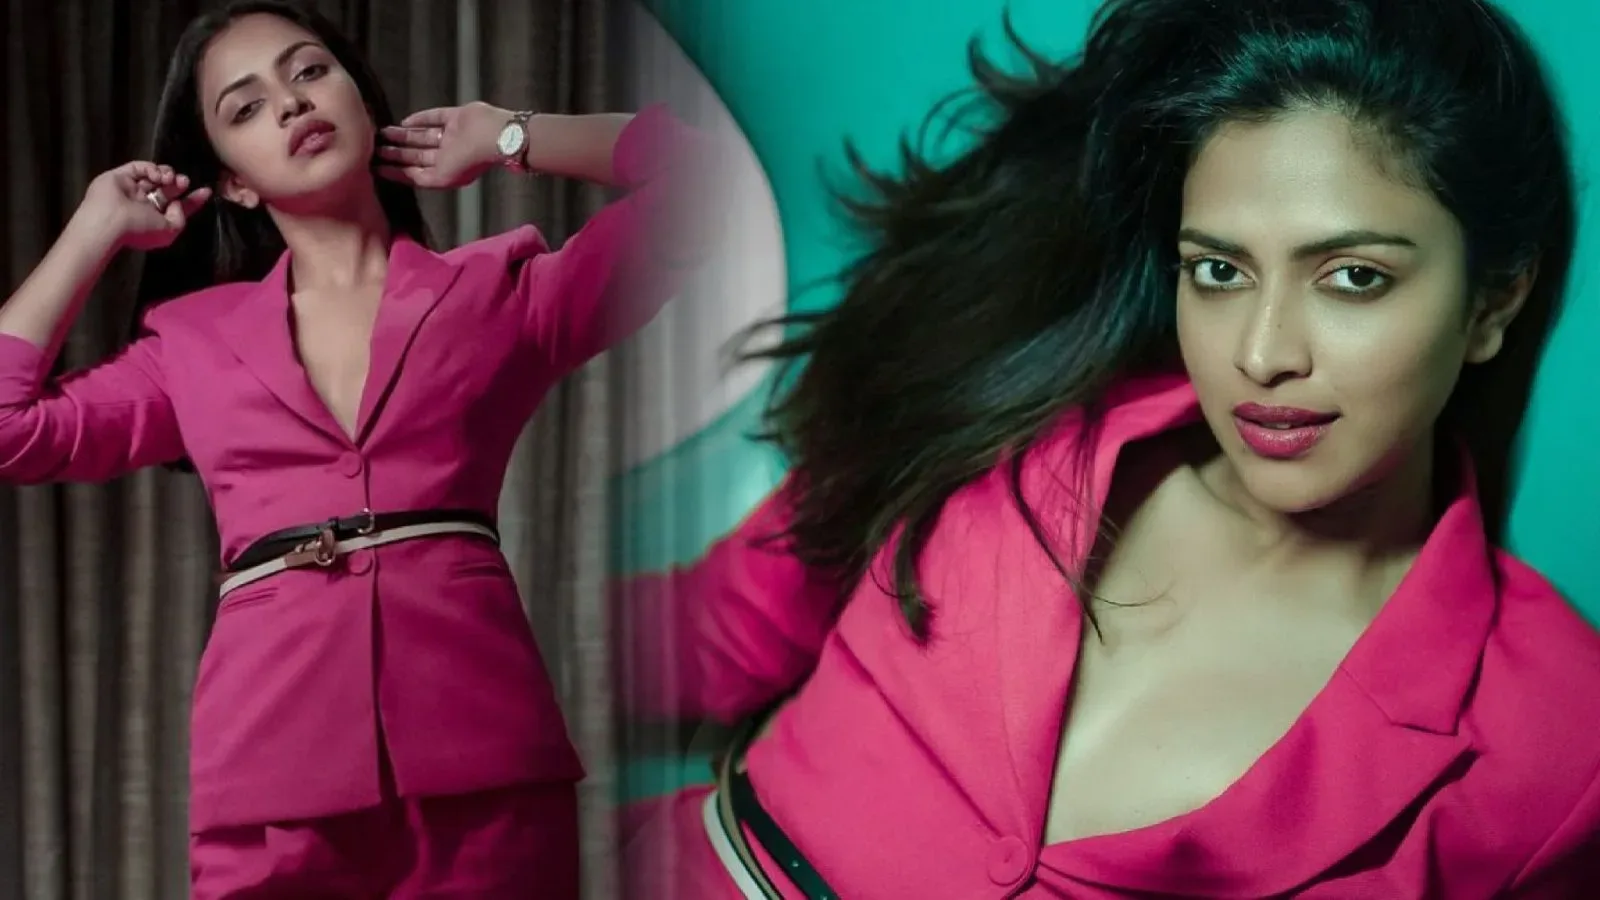 South Indian Actress Amala Paul looks stylish in pink suit